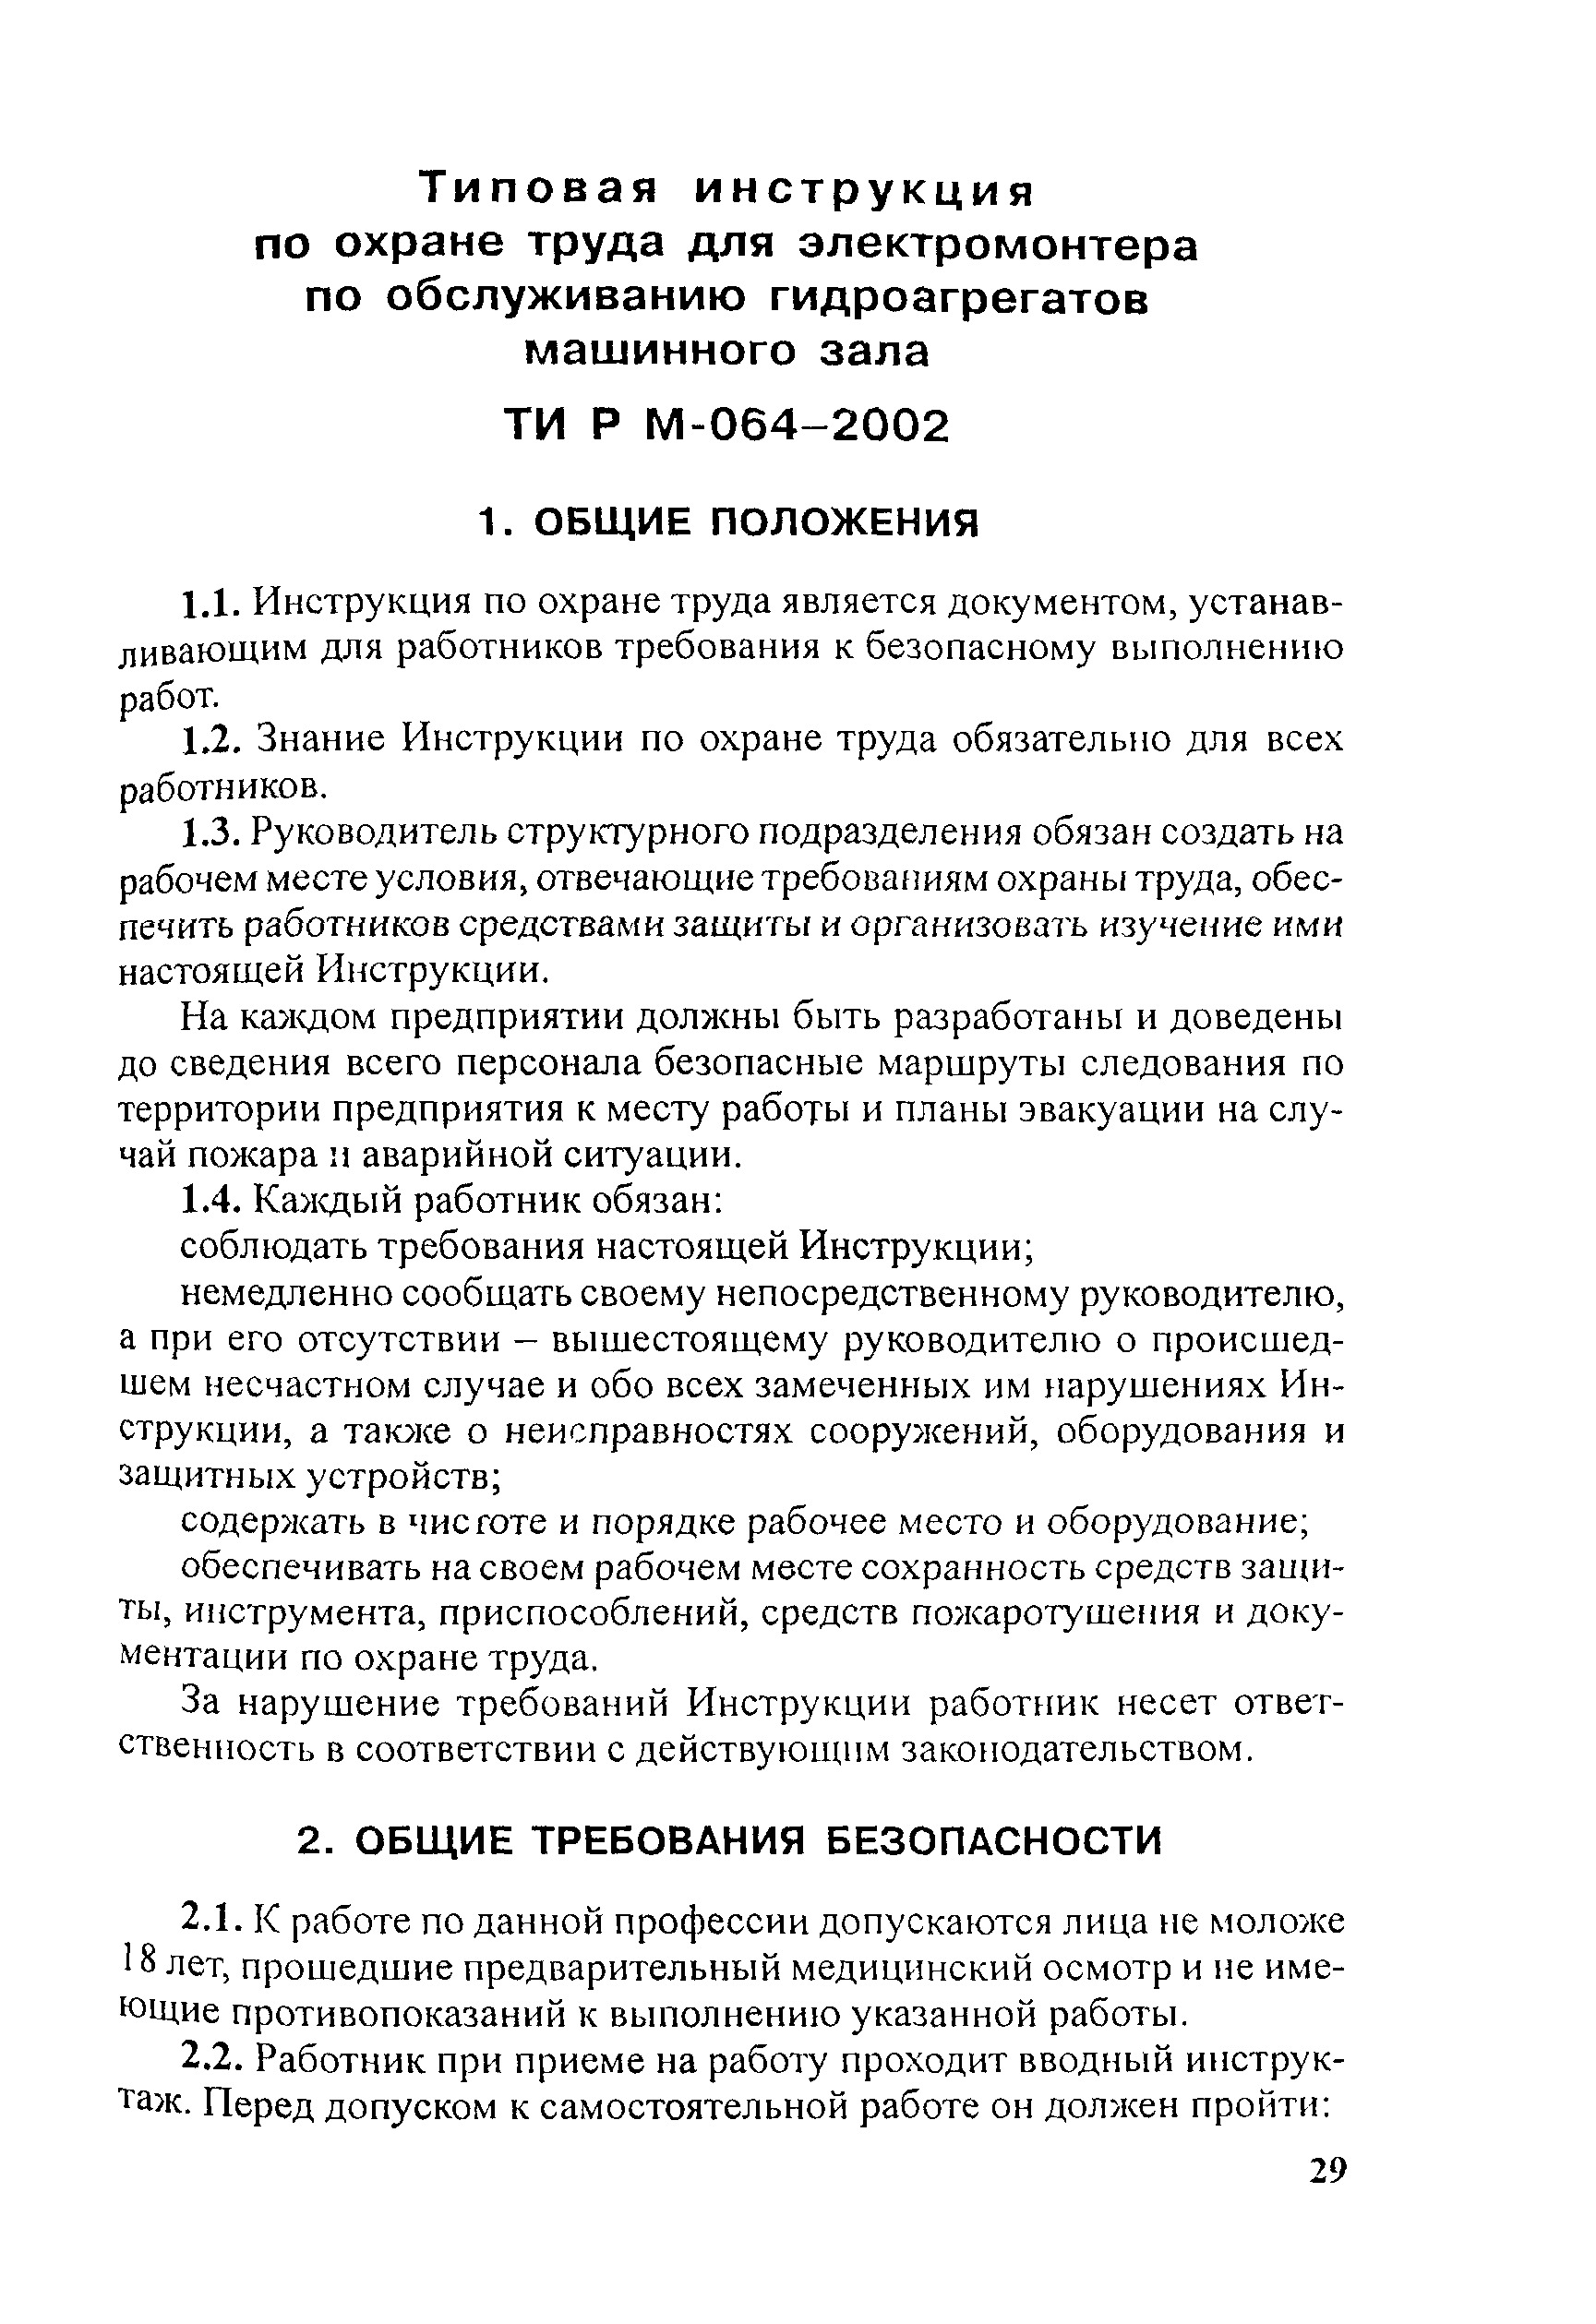 ТИ Р М-064-2002